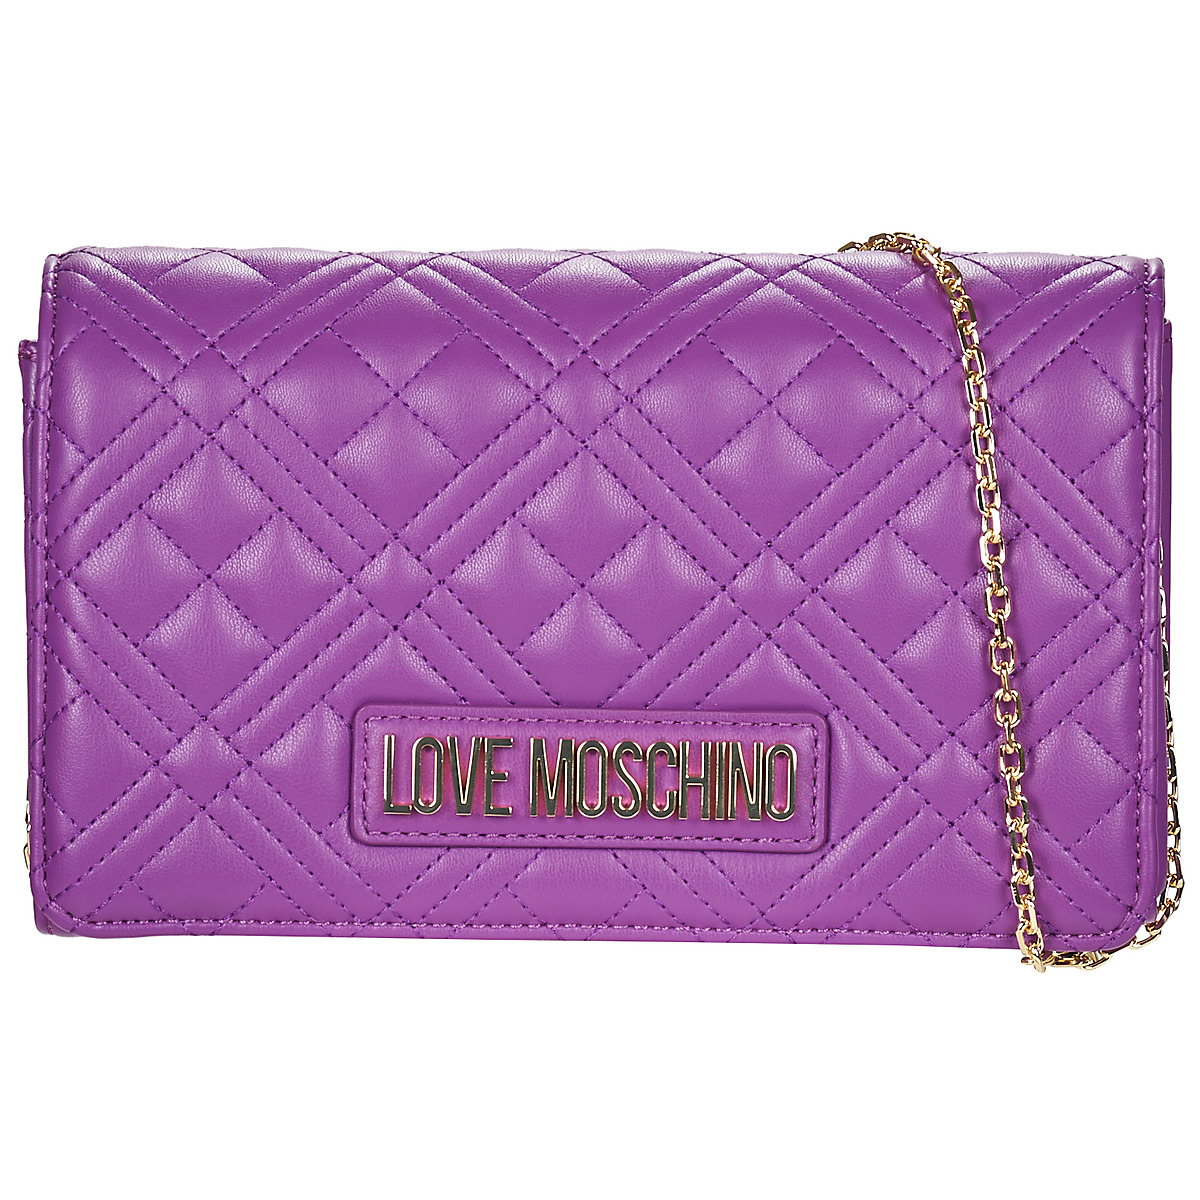 Love Moschino Violet SMART DAILY BAG JC4079 gSCGFMrC